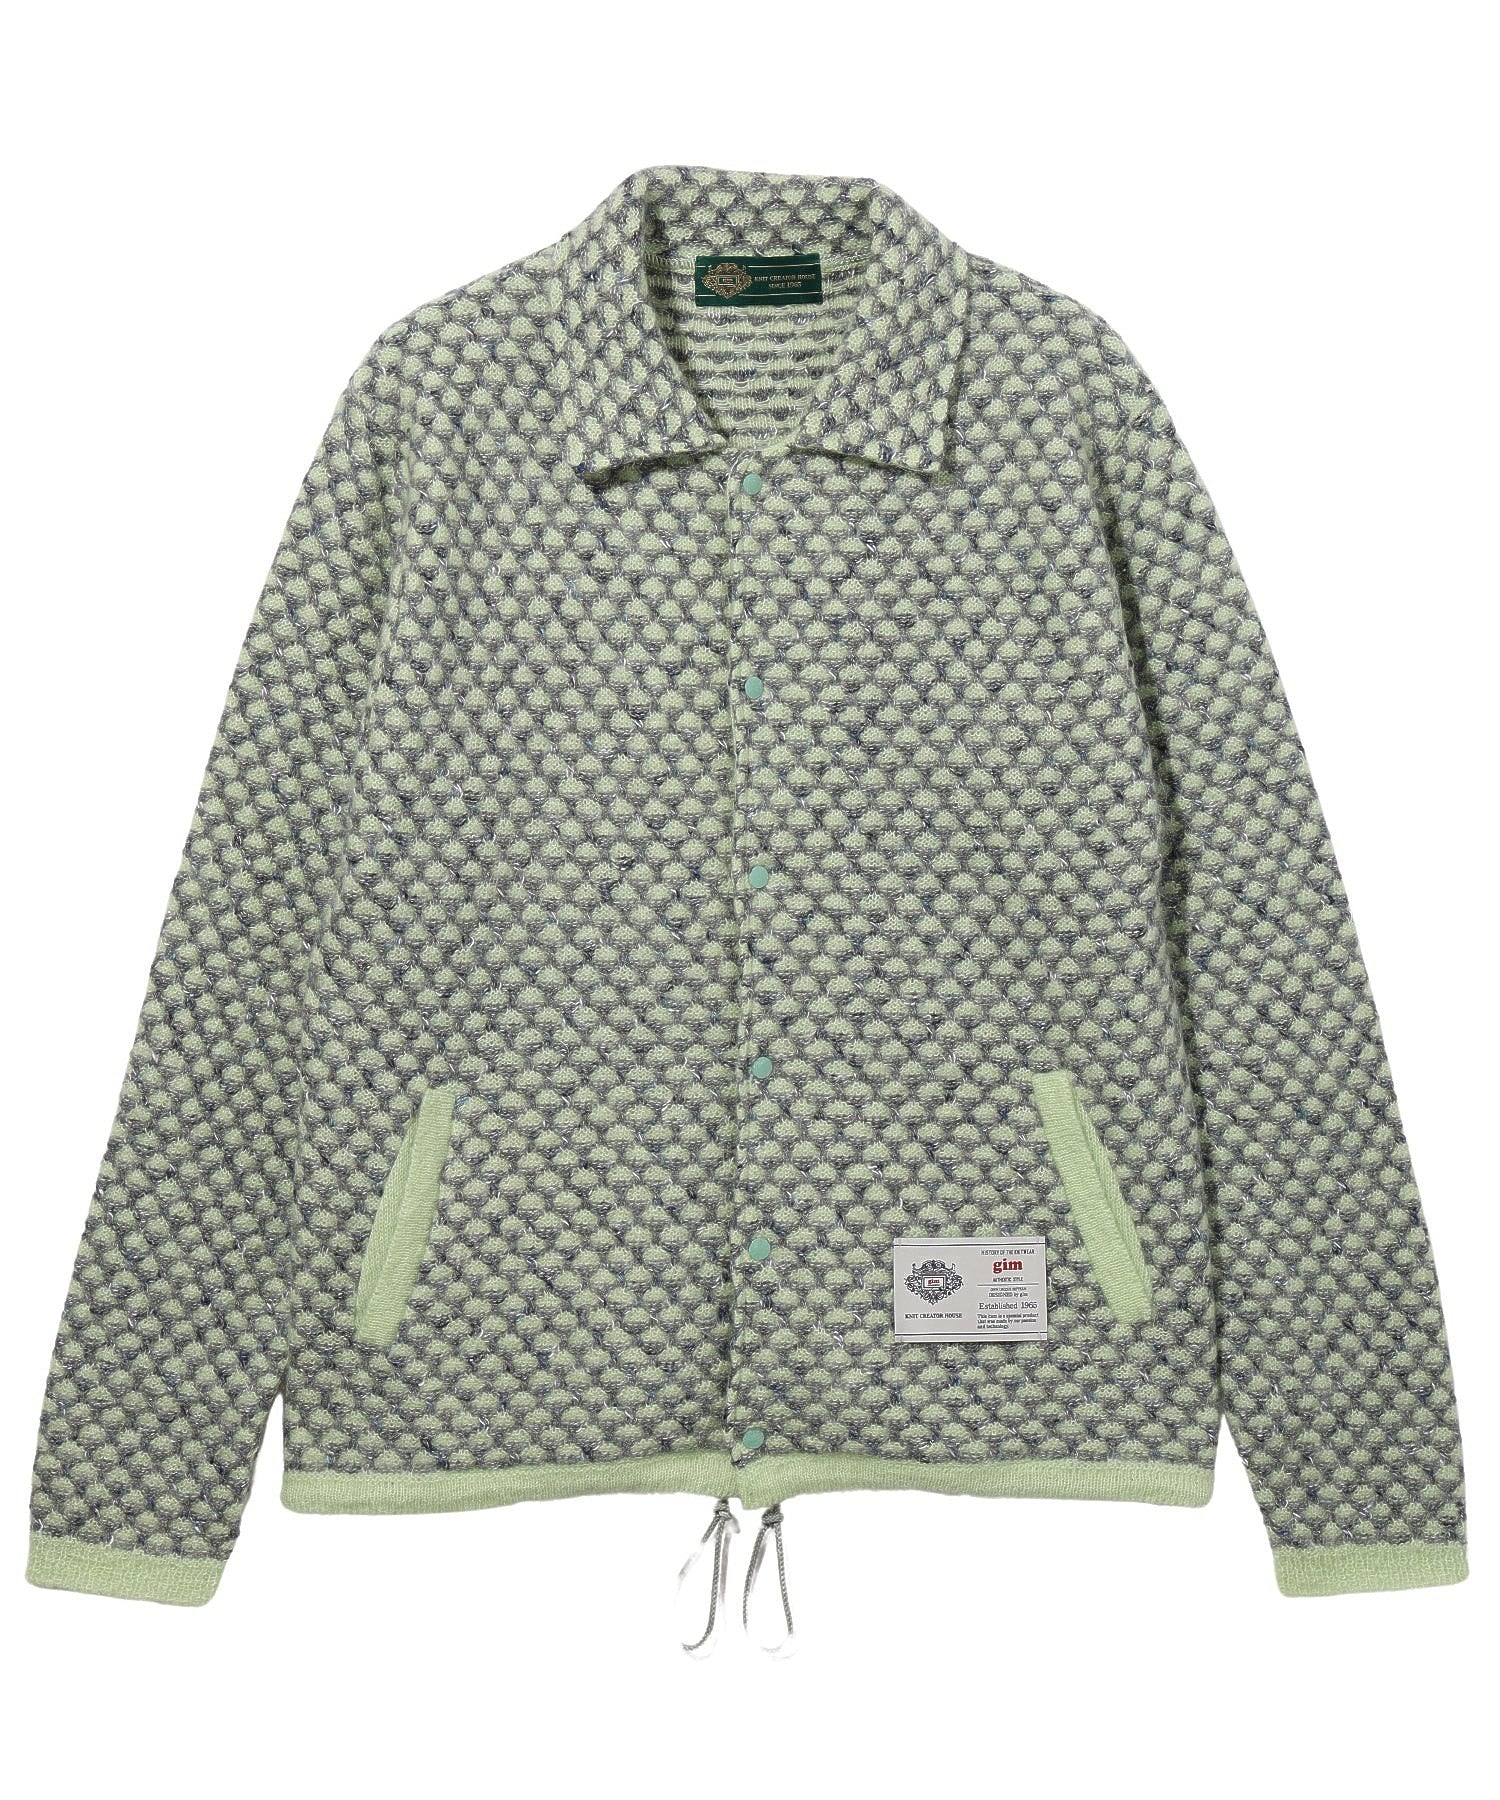 gim context/ジム コンテキスト/Knitted Coach Jacket/23505110